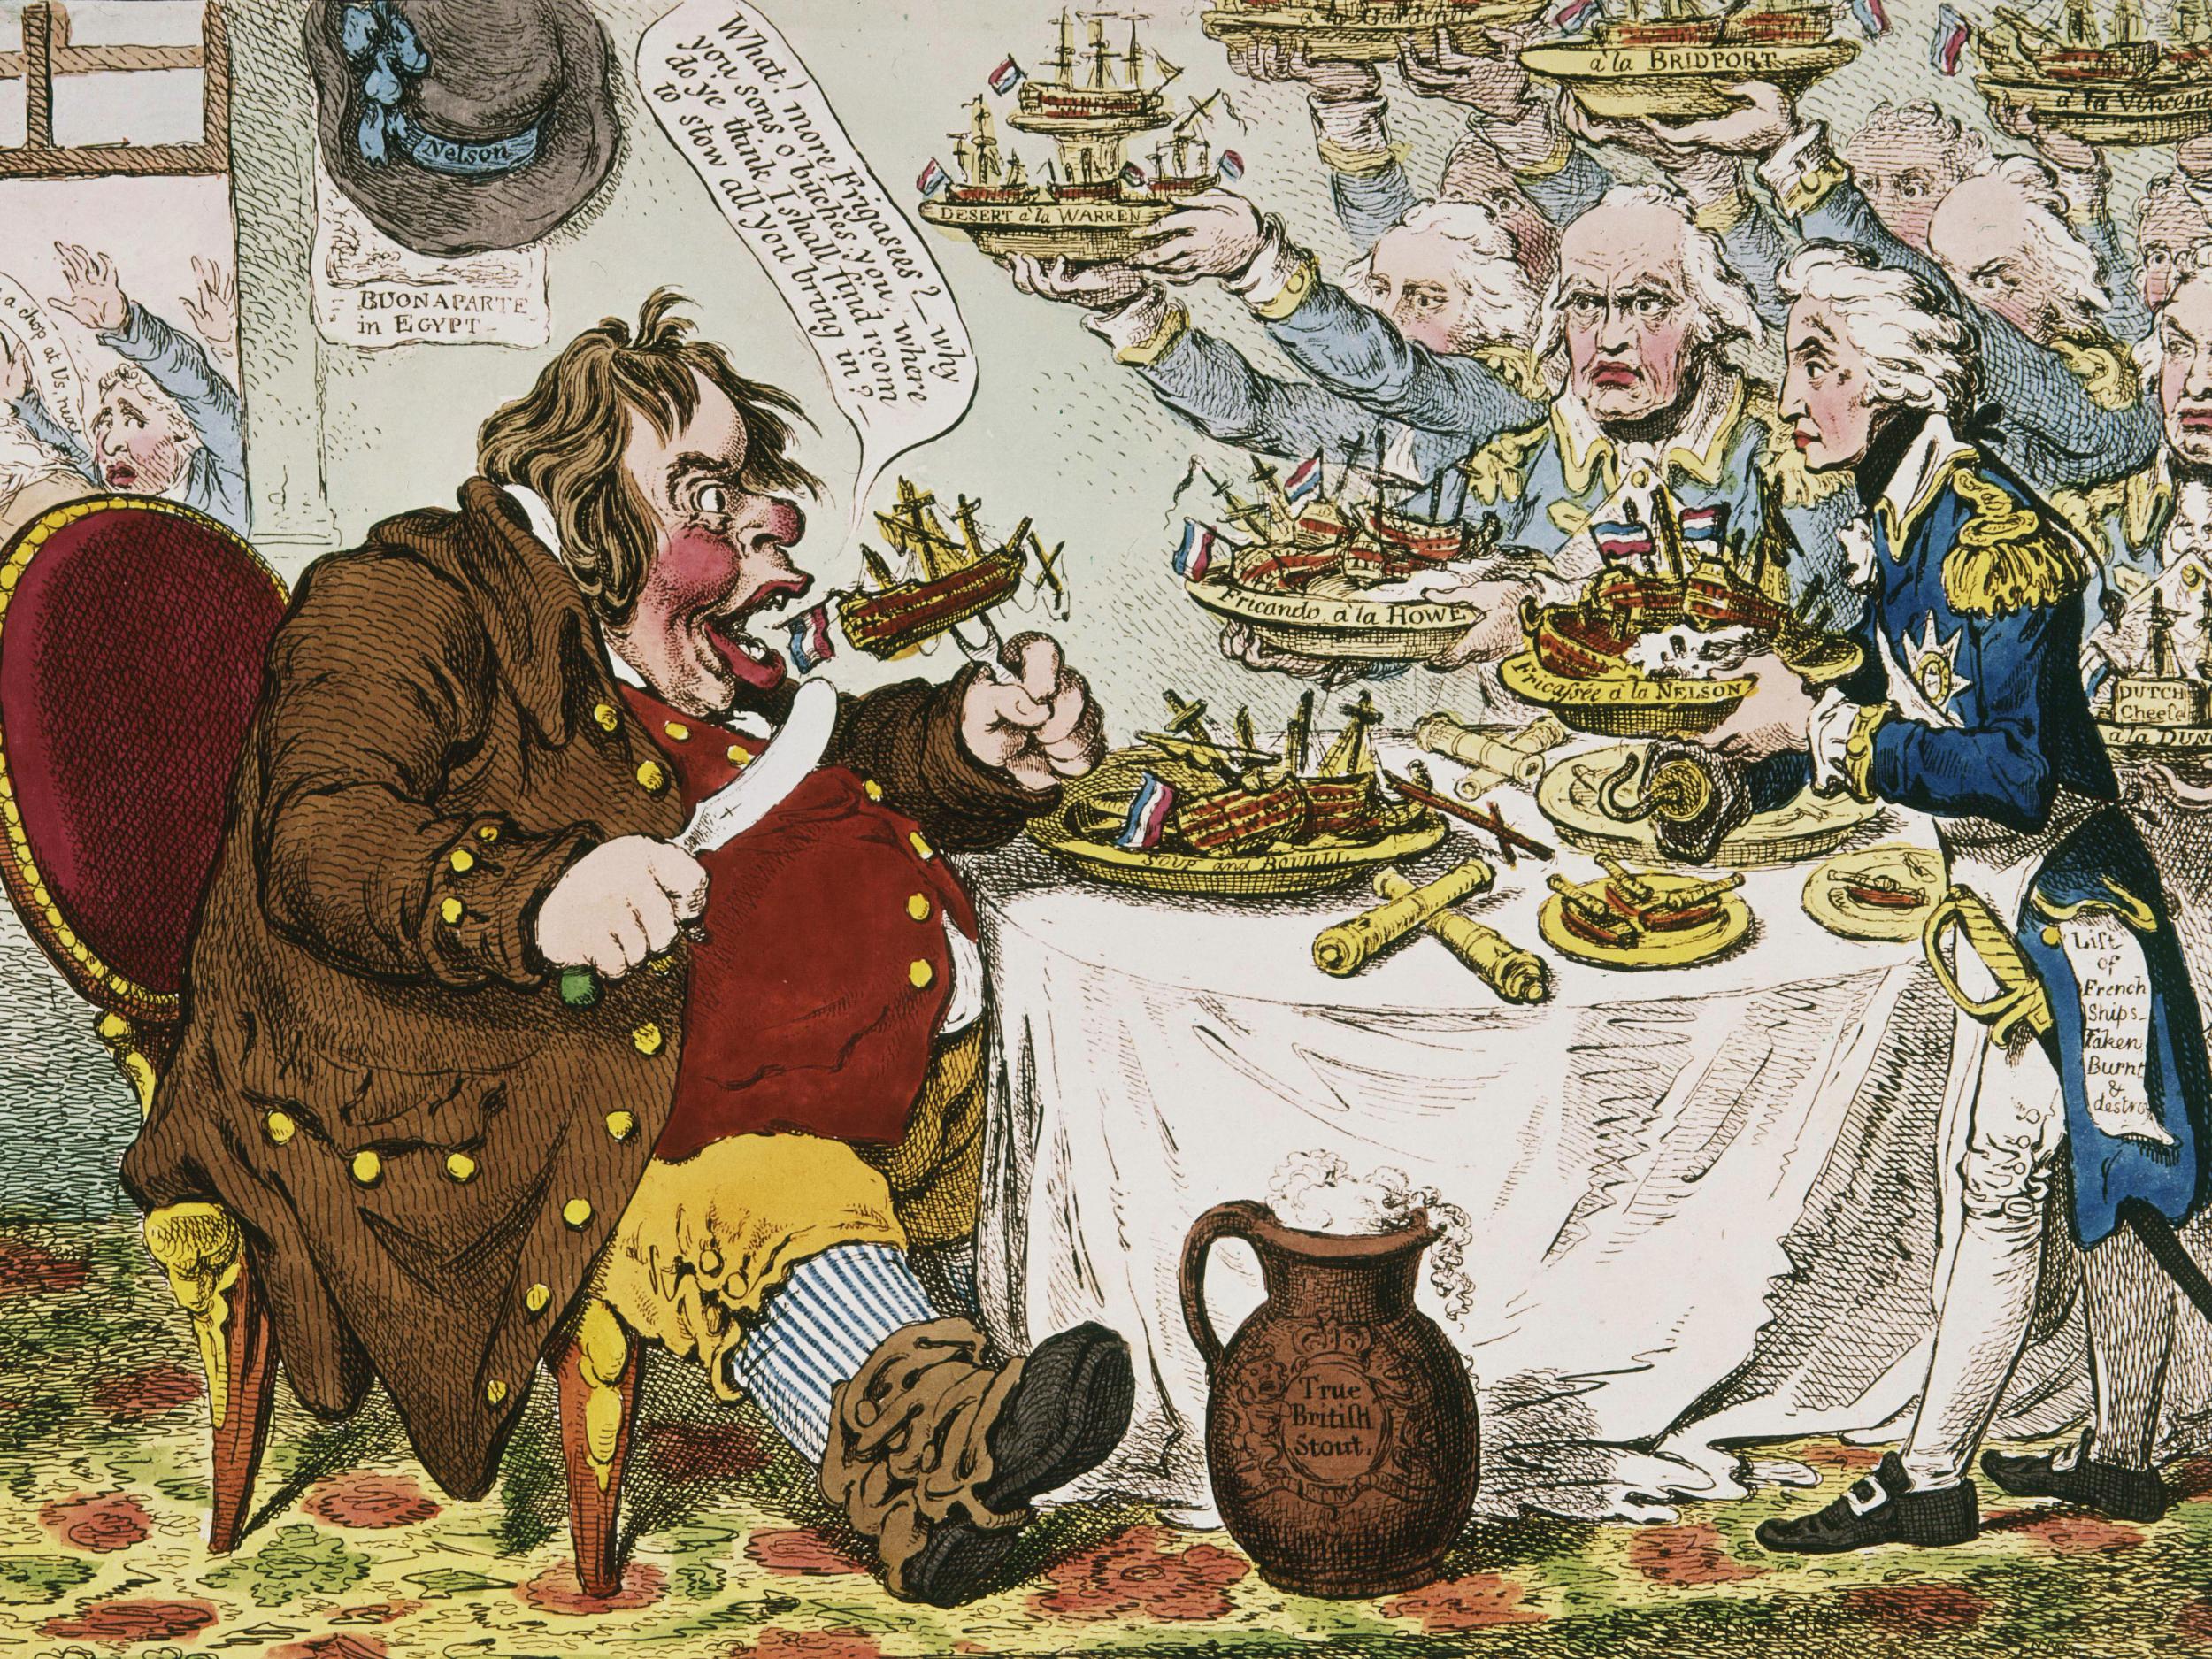 John Bull Taking a Luncheon Served by Nelson (1798) by James Gillray, the 18th century cartoonist's archetypal image of the ruddy-cheeked British patriot